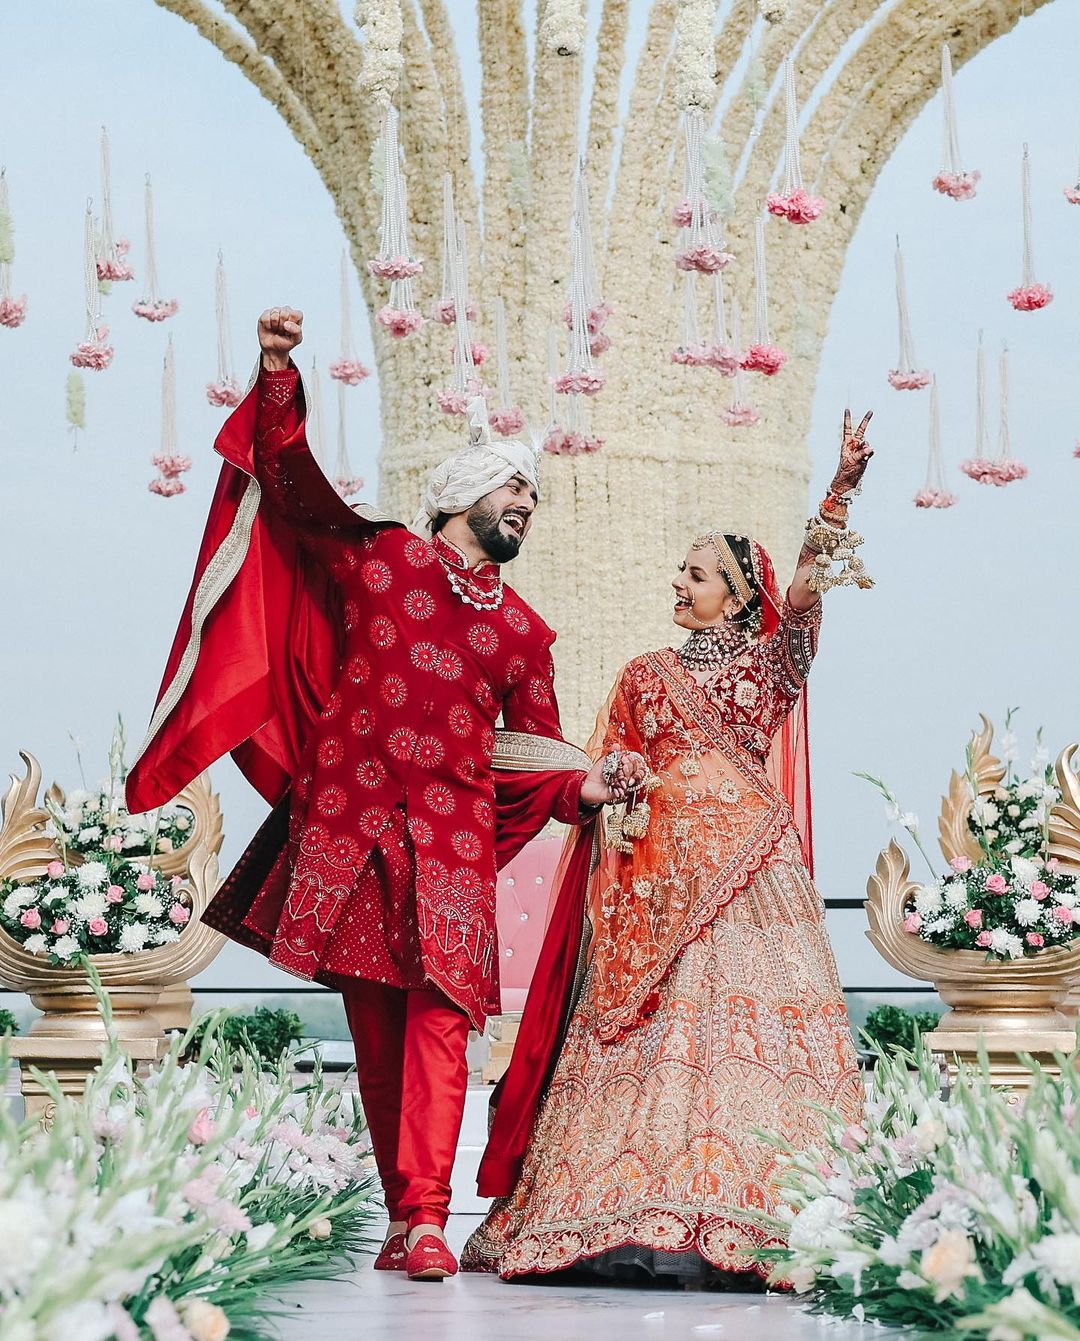 Love Birds Shrenu Parikh And Akshay Mhatre Happily Begin Their Beautiful Marriage Life! Snaps Of Newlyweds Steal The Fans' Hearts And Became Viral On The Internet!